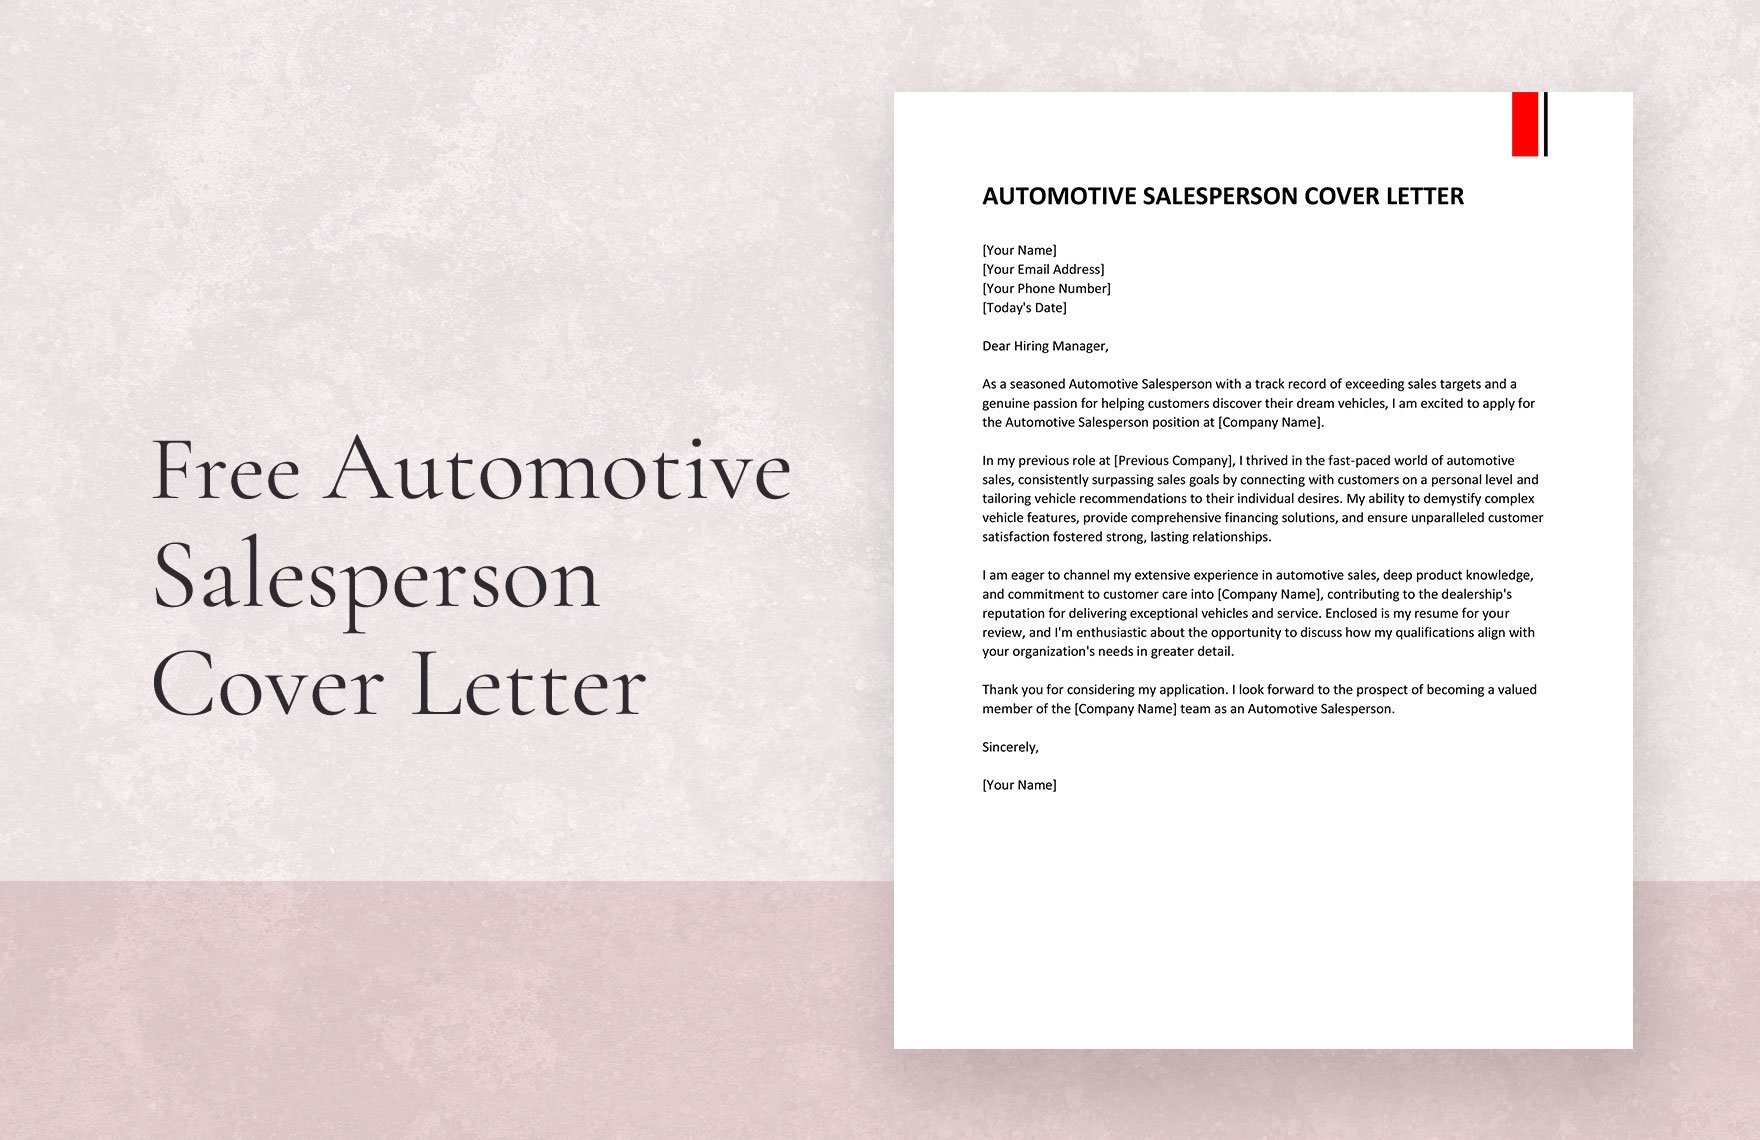 Automotive Salesperson Cover Letter in Word, Google Docs